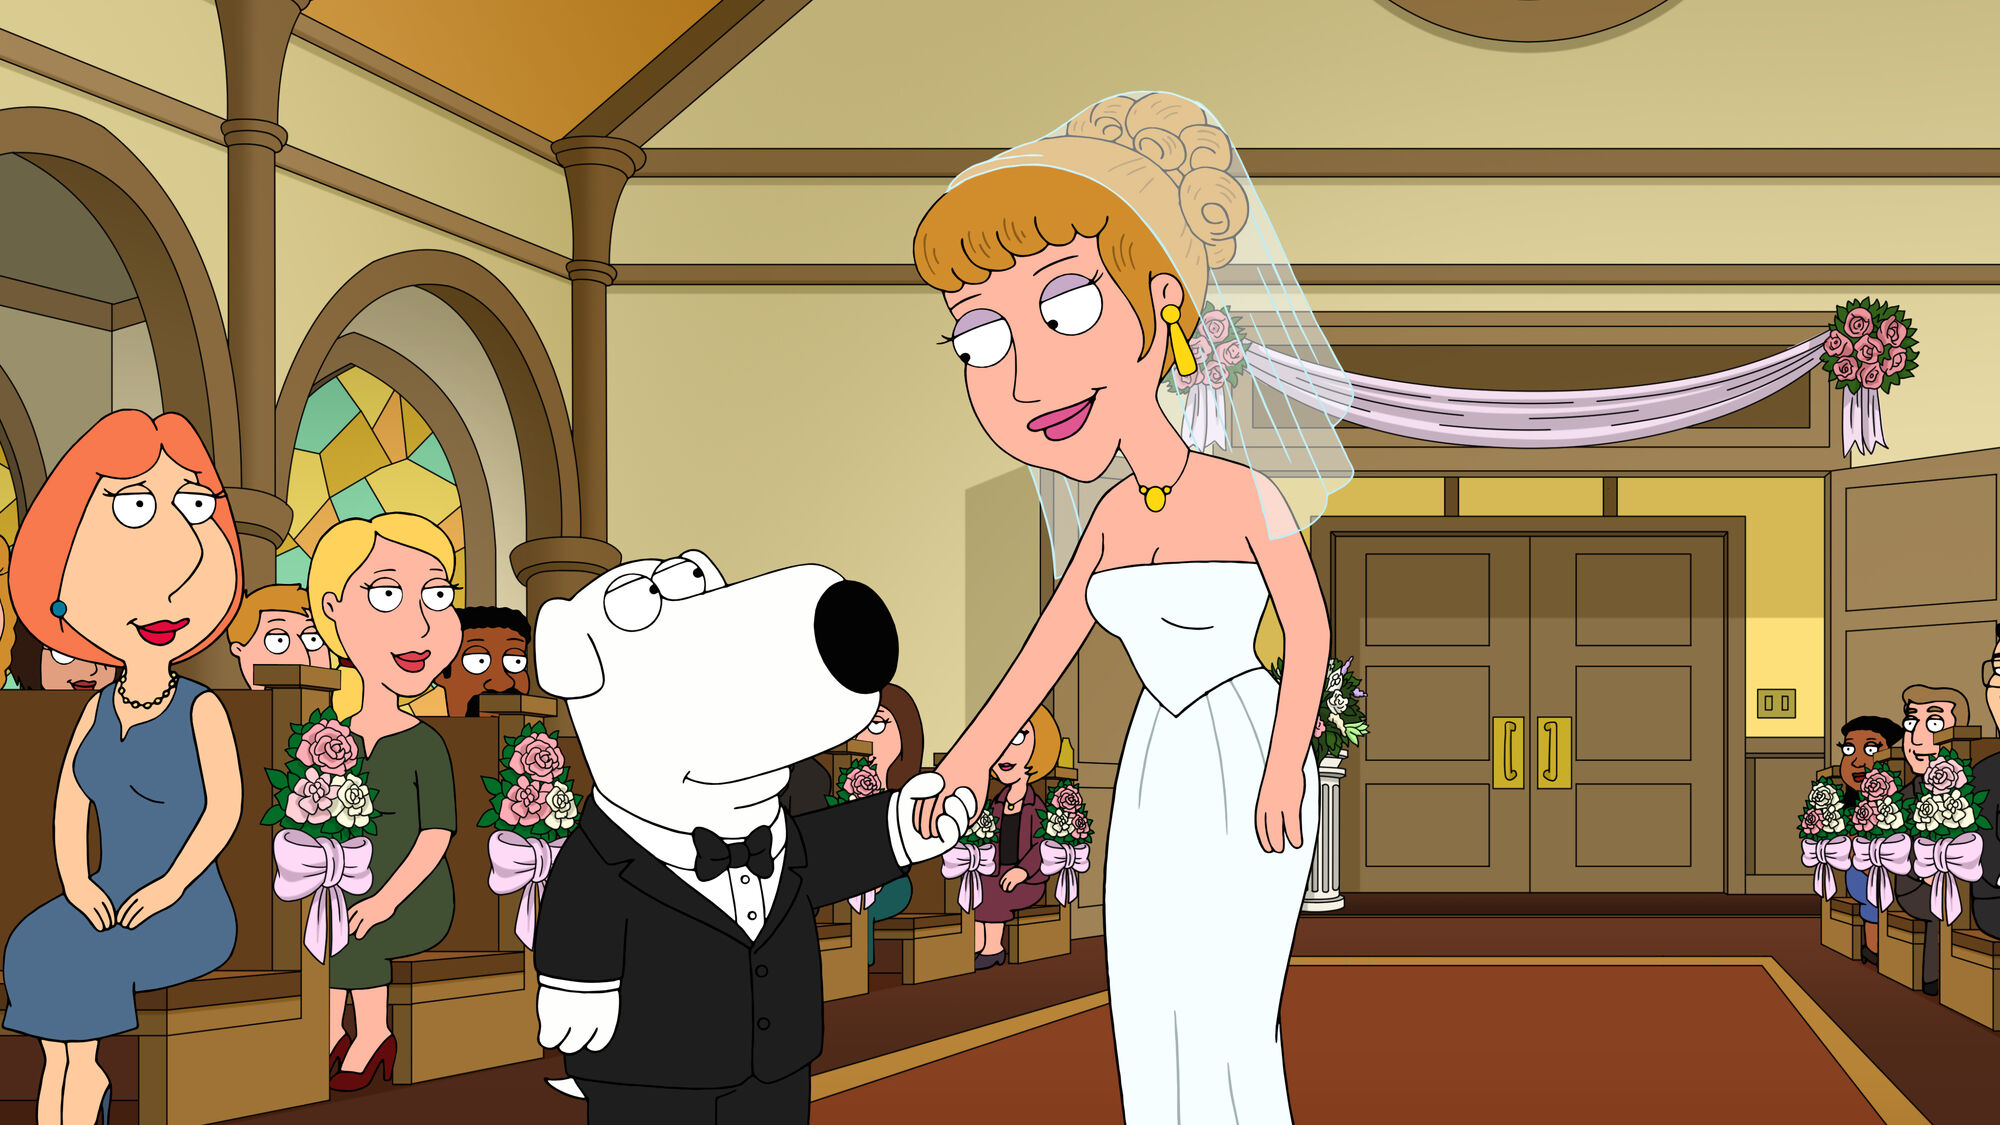 Pin by stephanie spins on reacts | Family guy meme, Lois 